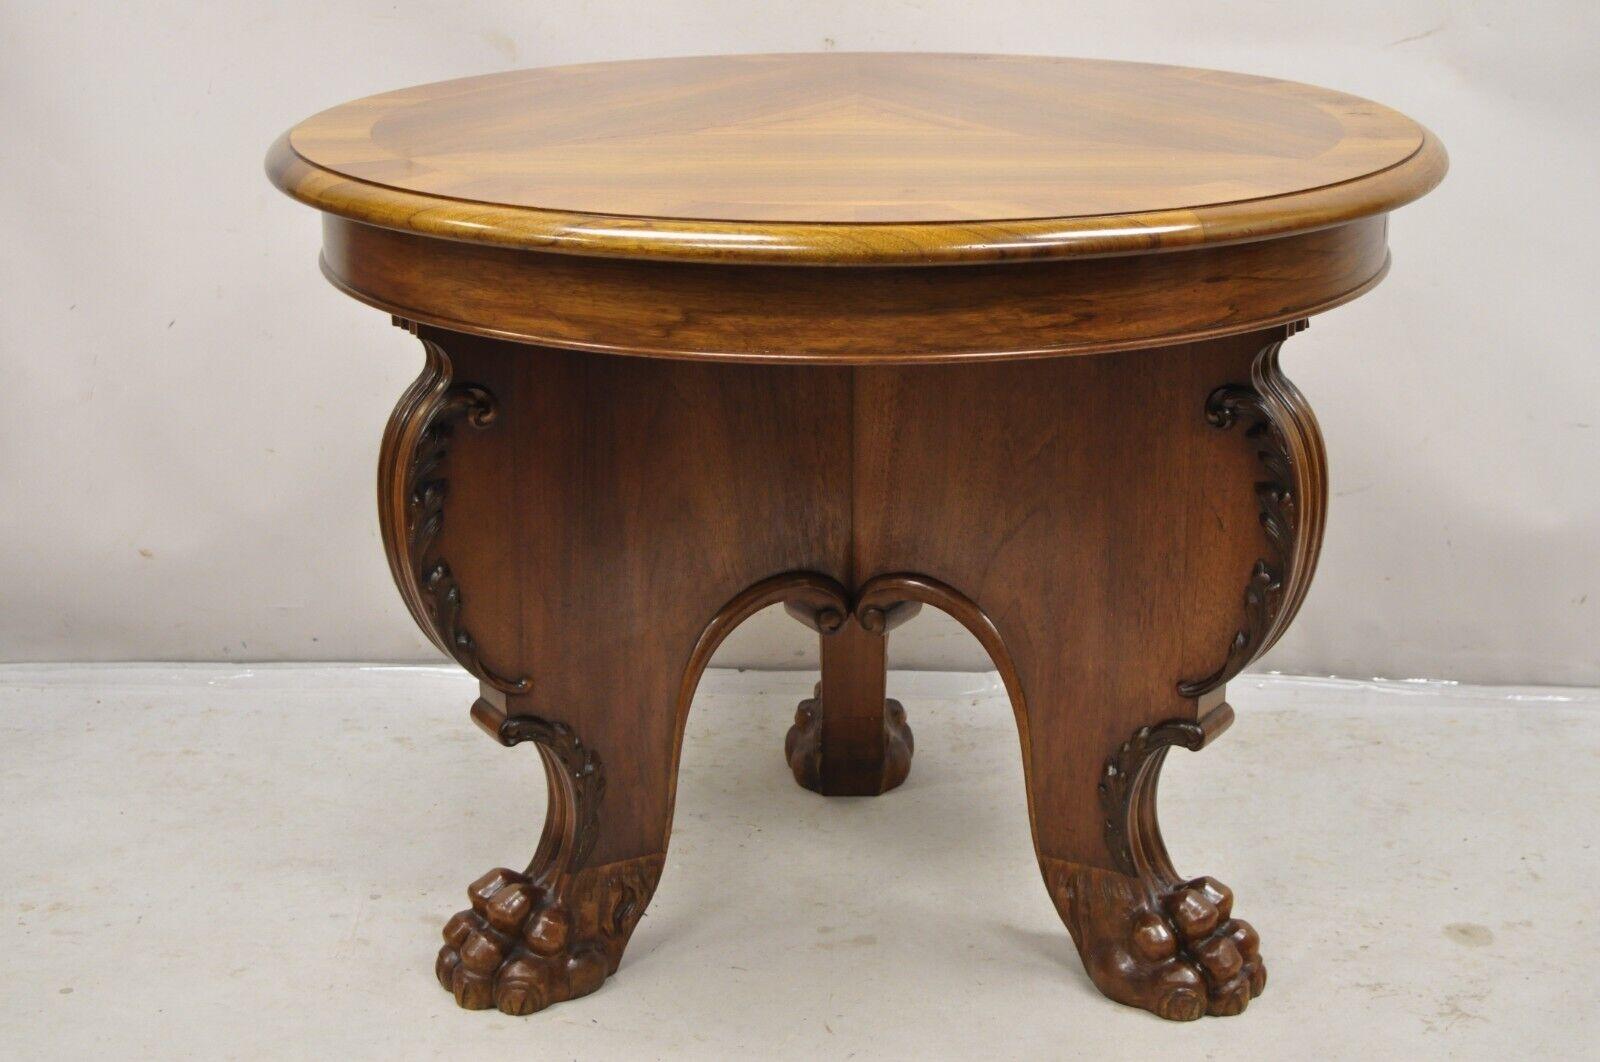 Antique German Renaissance Revival Carved Walnut Paw Feet Round Center Table For Sale 7